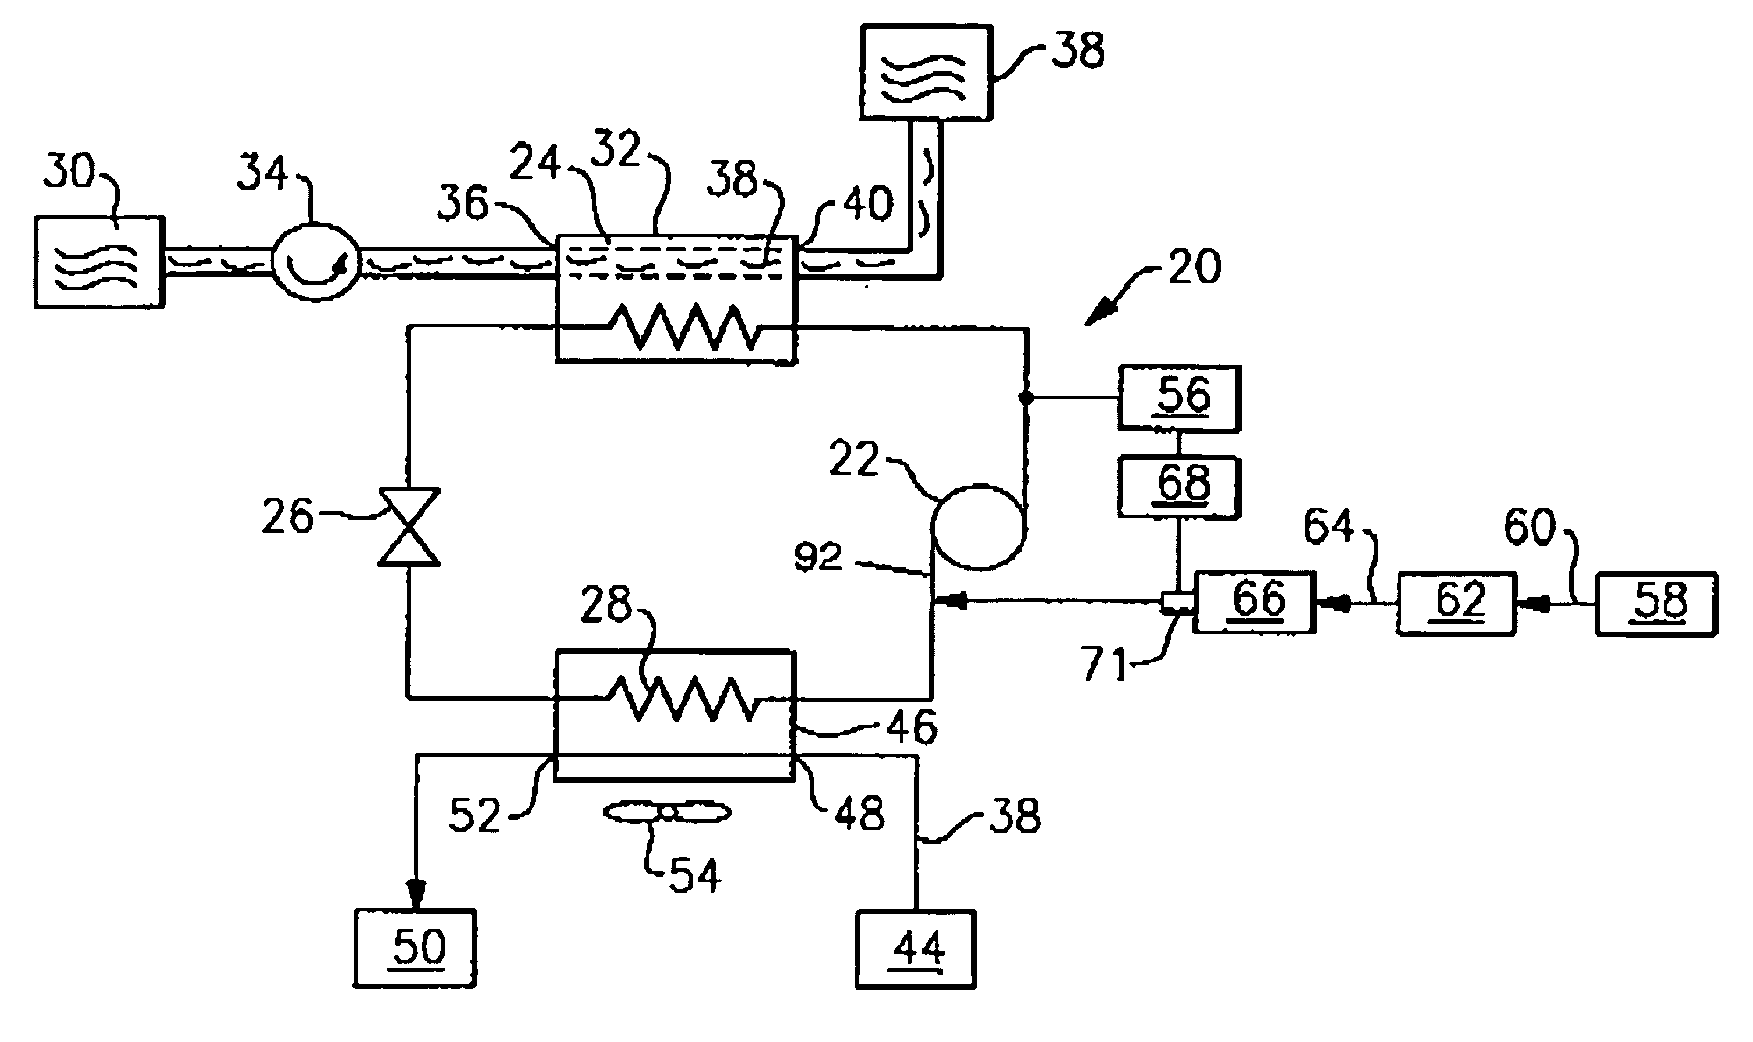 Method for extracting carbon dioxide for use as a refrigerant in a vapor compression system